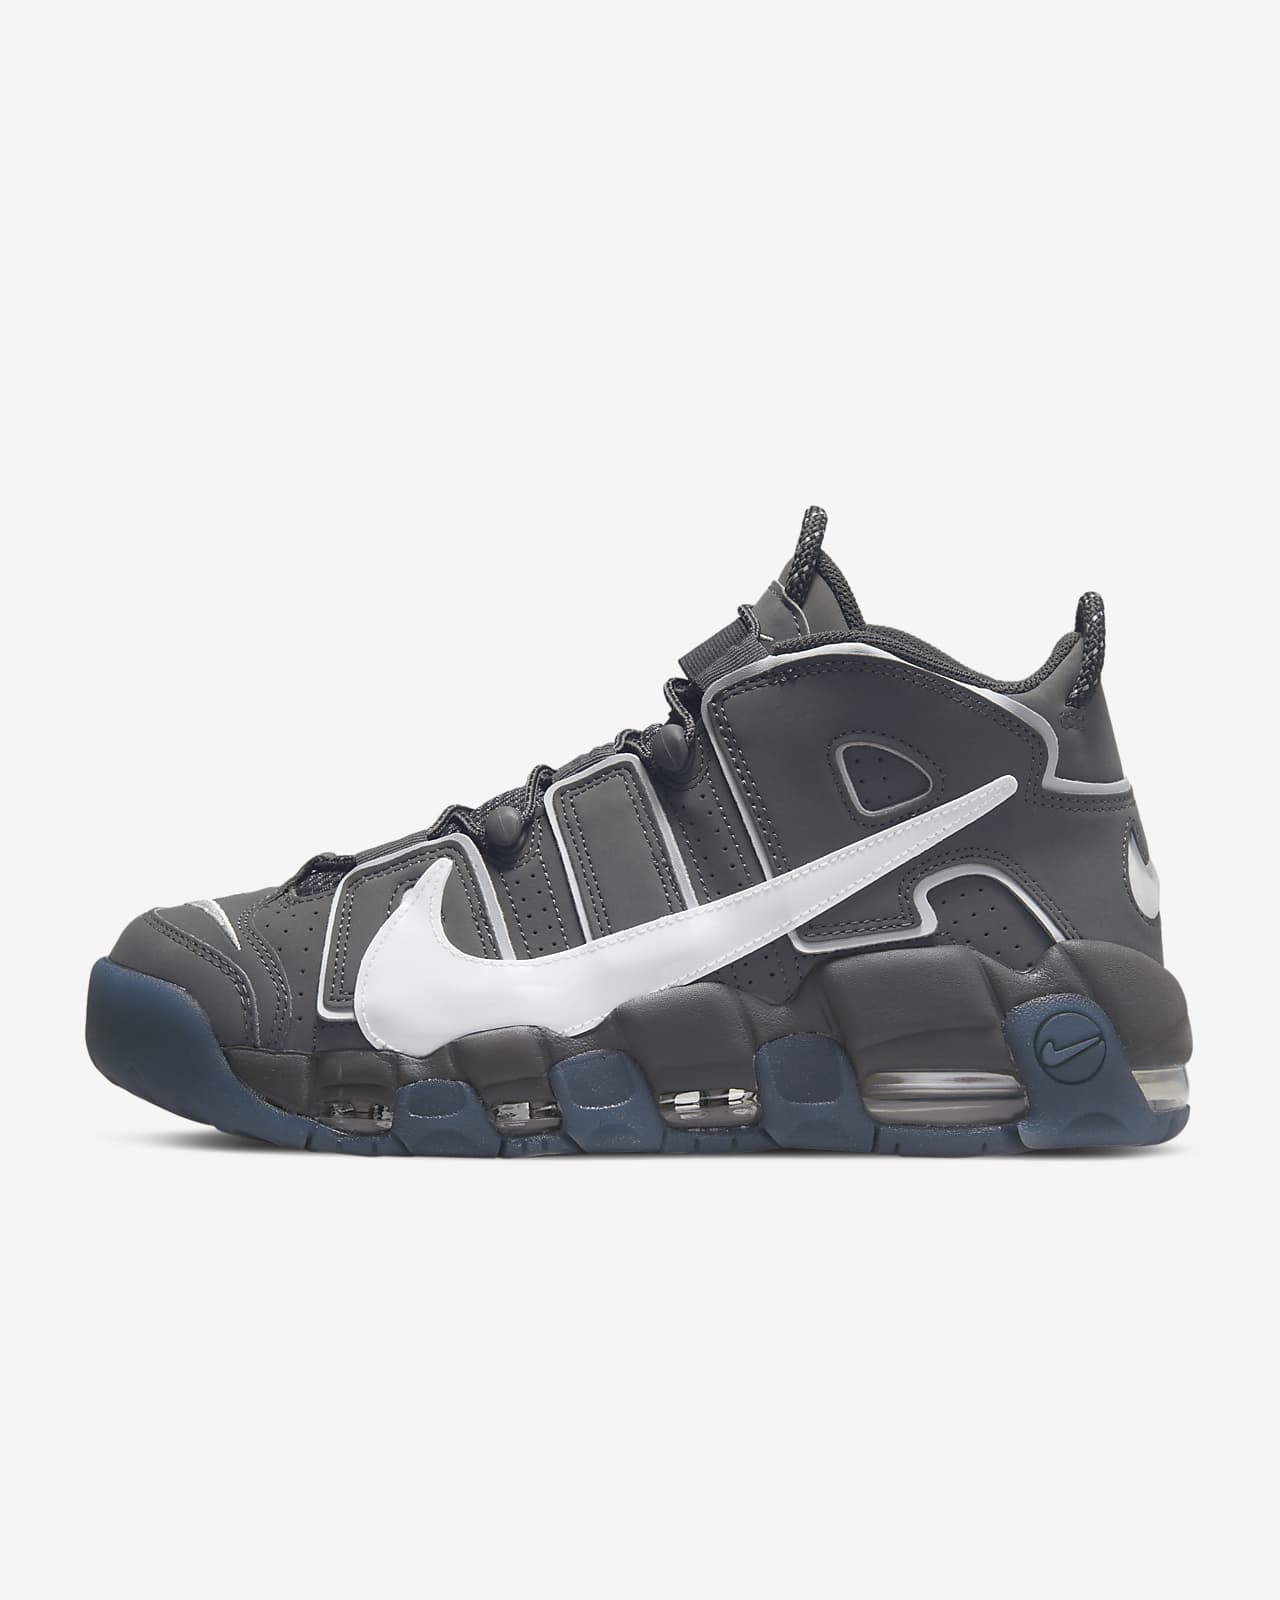 Nike Air More nike air more uptempo 96 black and white Uptempo '96 Men's Shoes